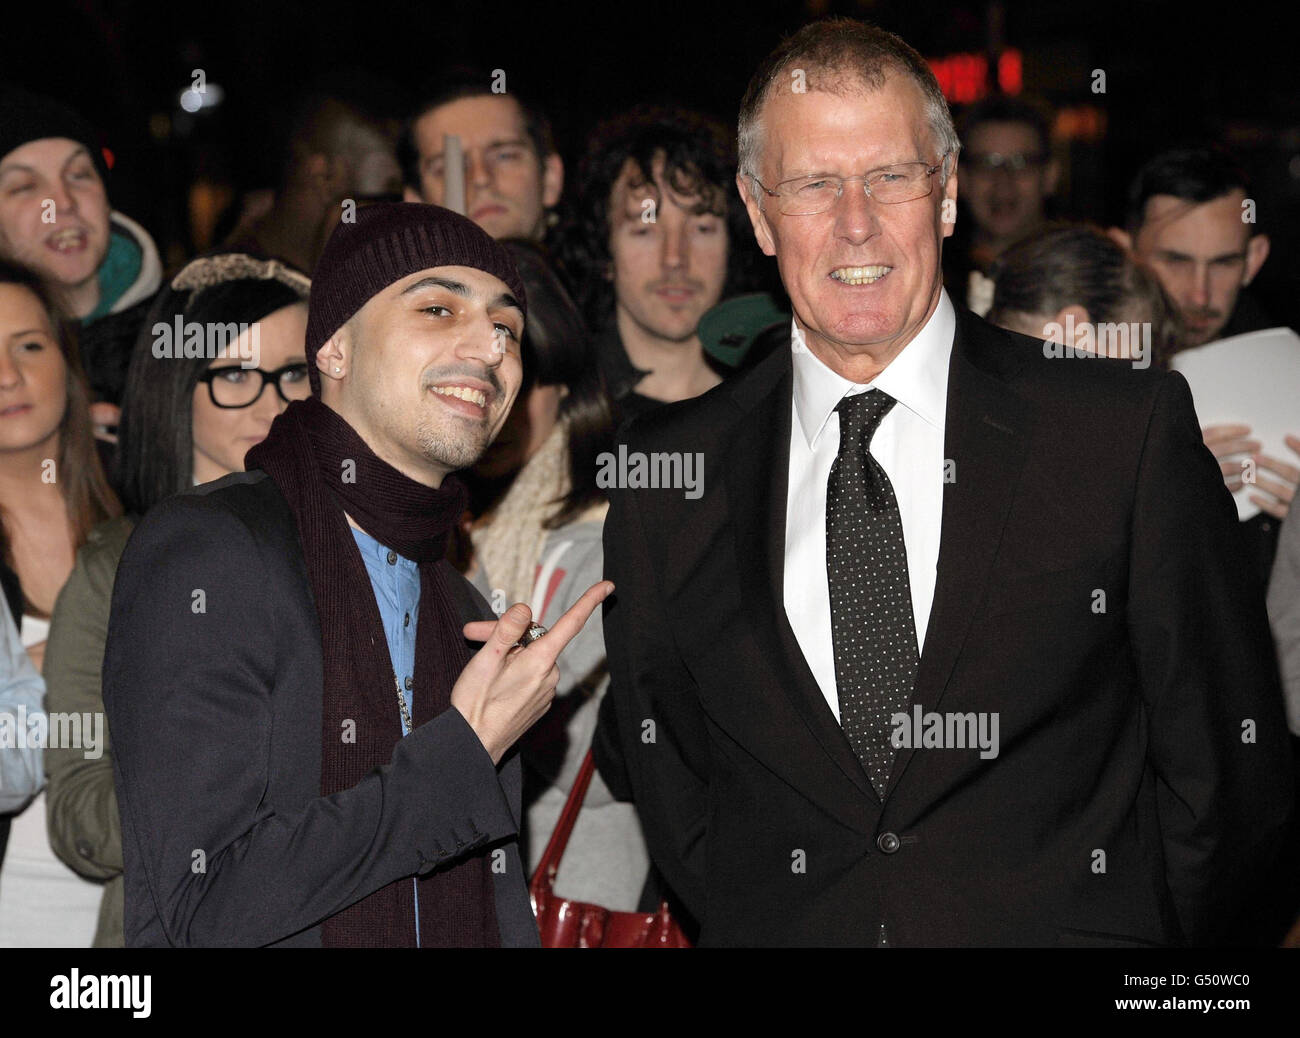 Adam Deacon (left) and Sir Geoff Hurst attend the premiere of Payback Season at the Odeon Covent Garden, London Stock Photo